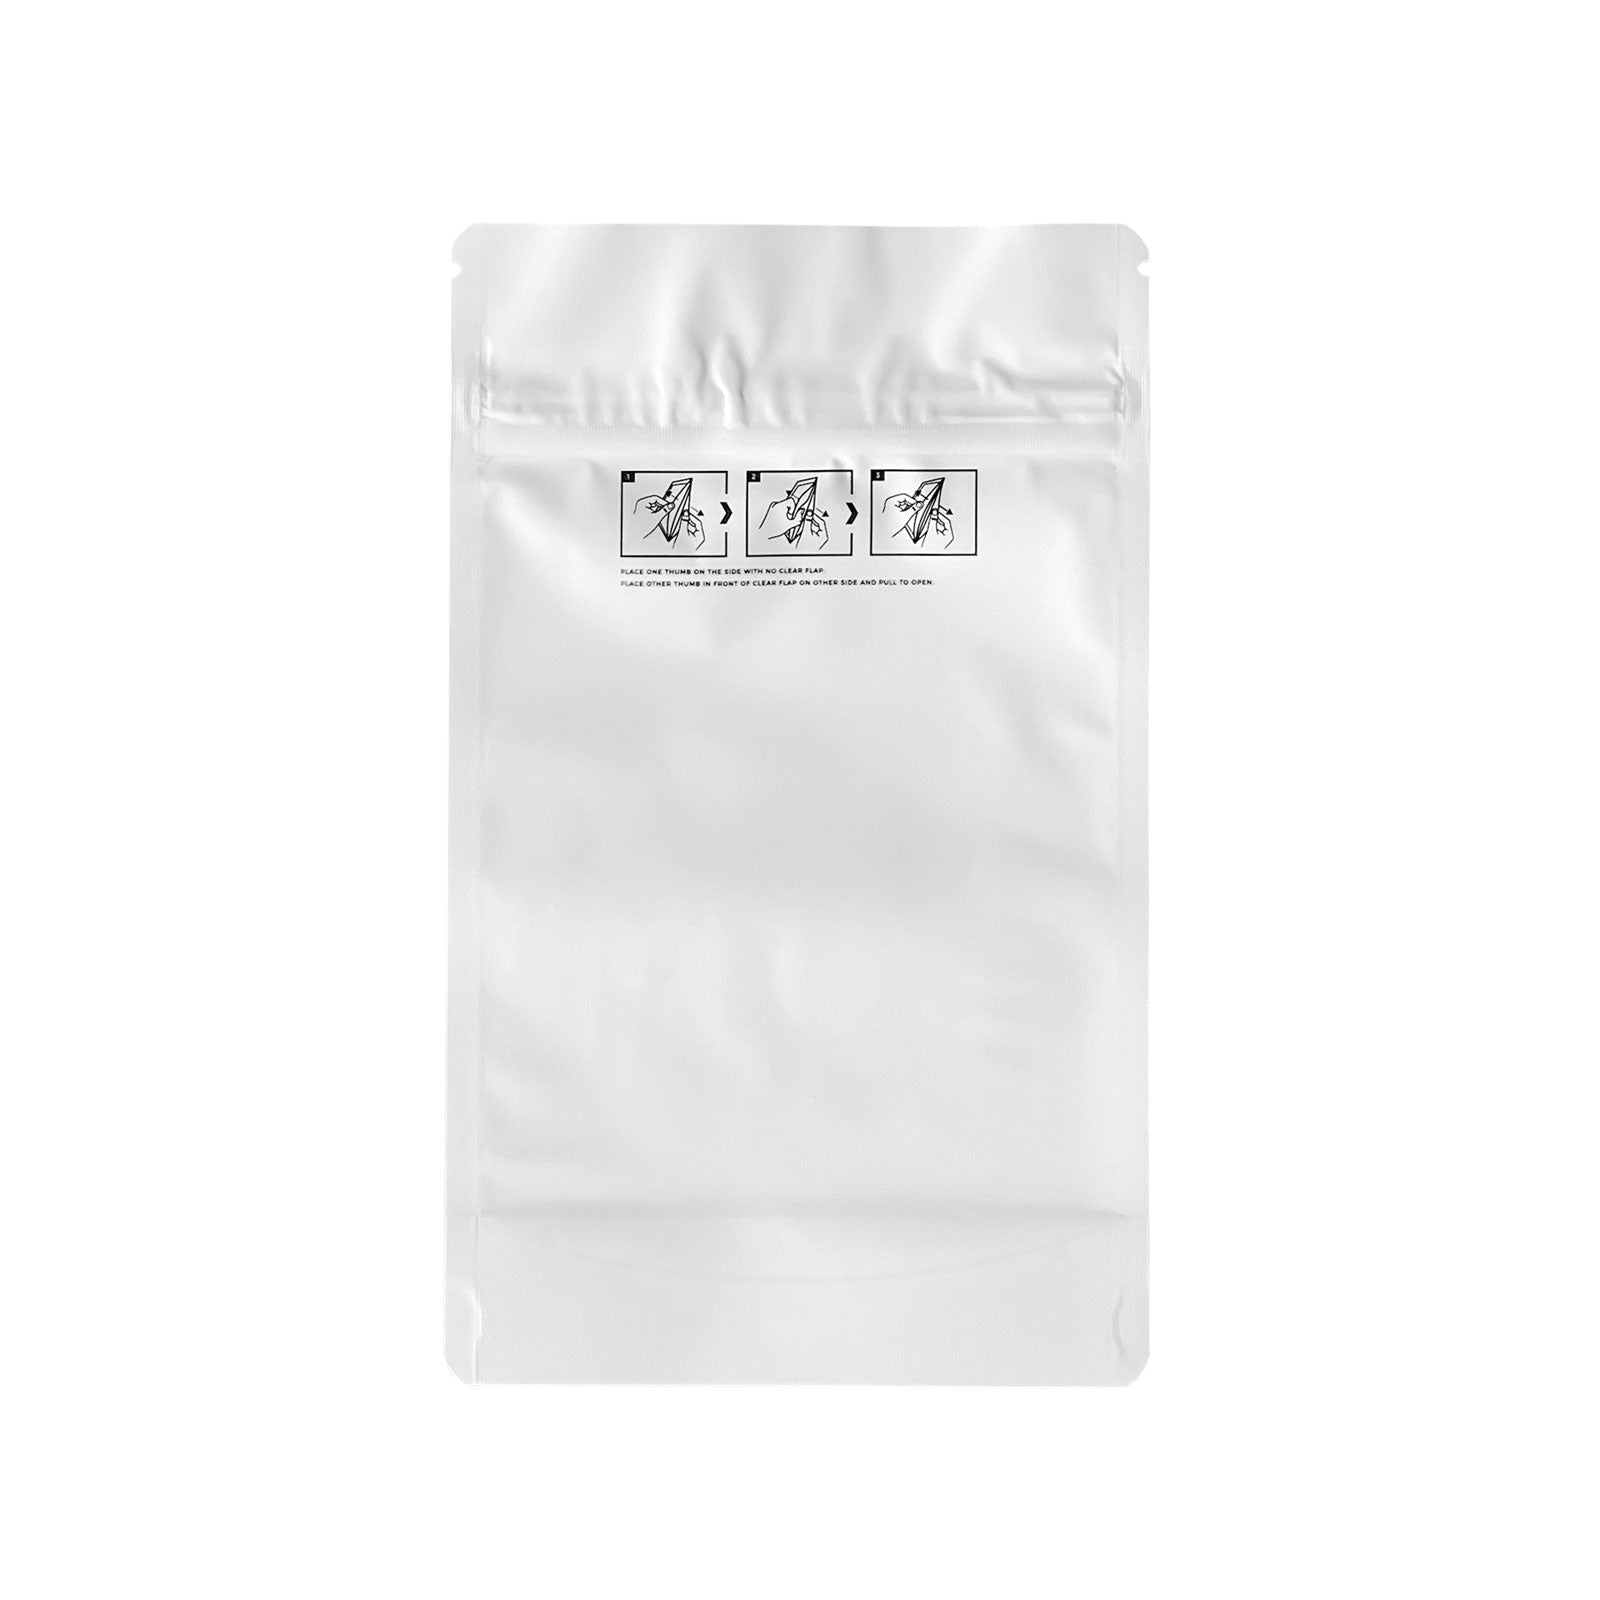 1/2 Ounce Child Resistant Bags All White 5"x8.15"+2.36" - 1,000 Count